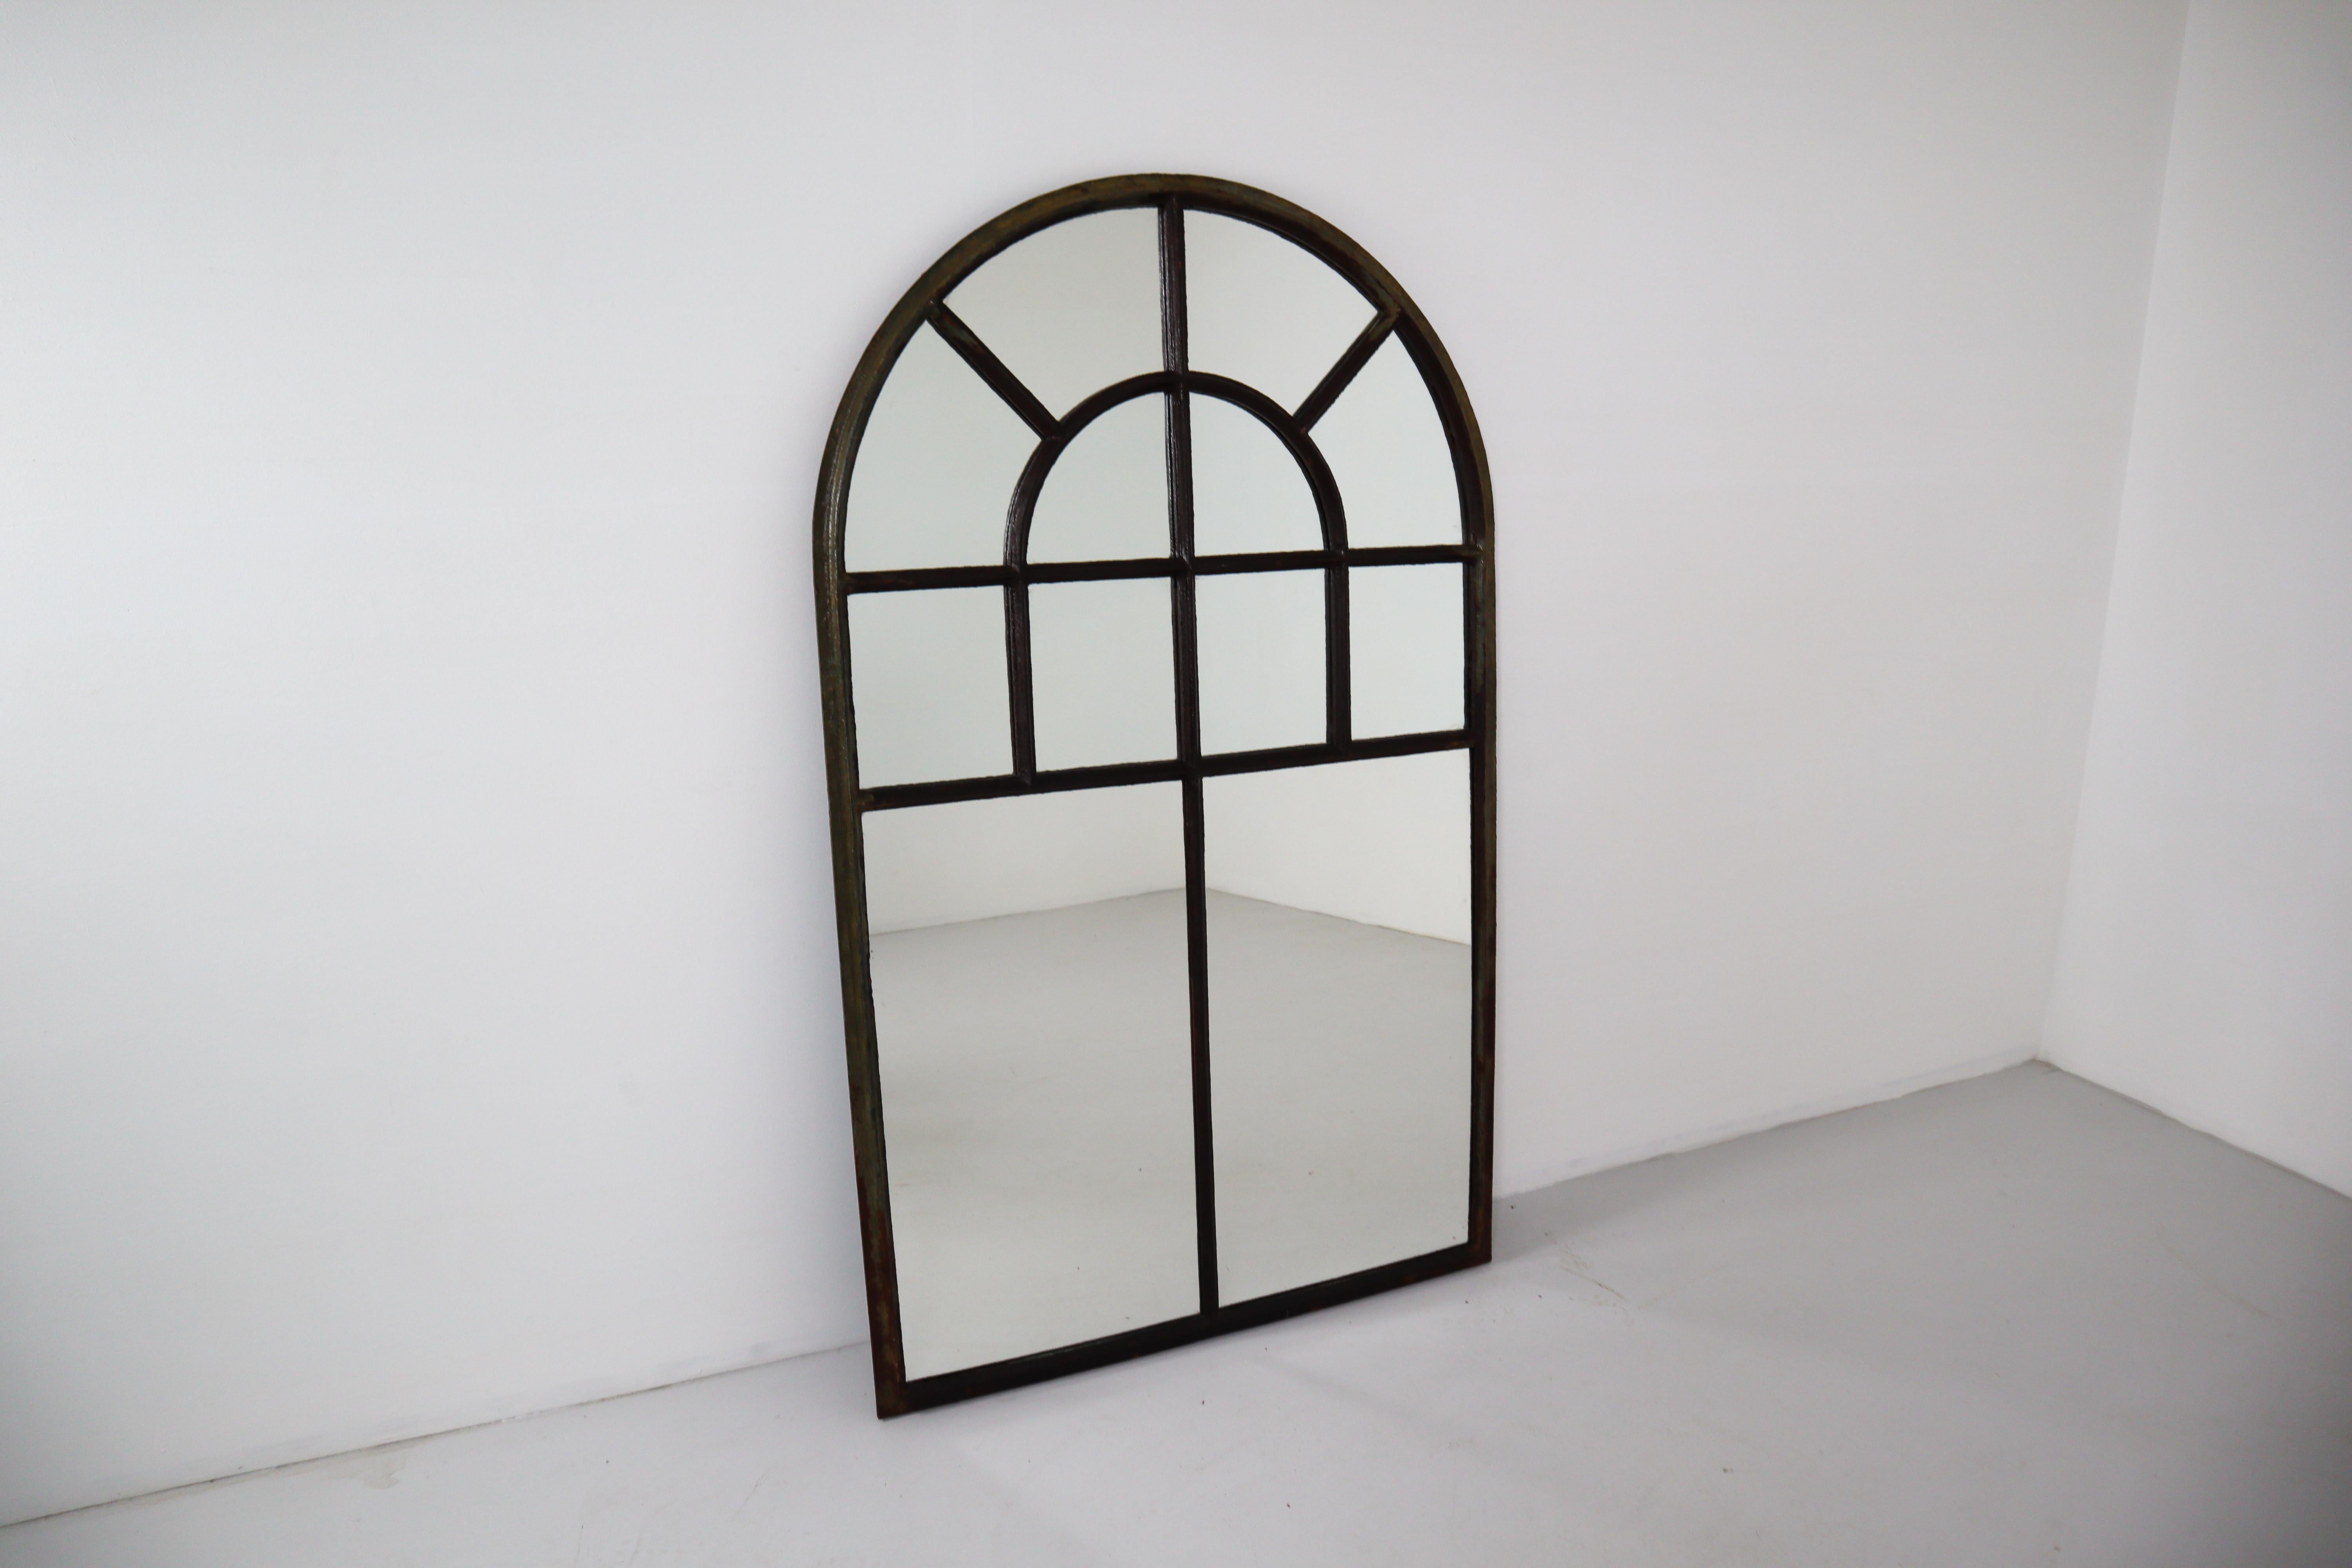 Large simple French cast iron arched Industrial window frame has been transformed into a mirror that looks stunning above a console table, hanging in a bedroom or hallway, or in any space where an understated piece that brings light and reflection